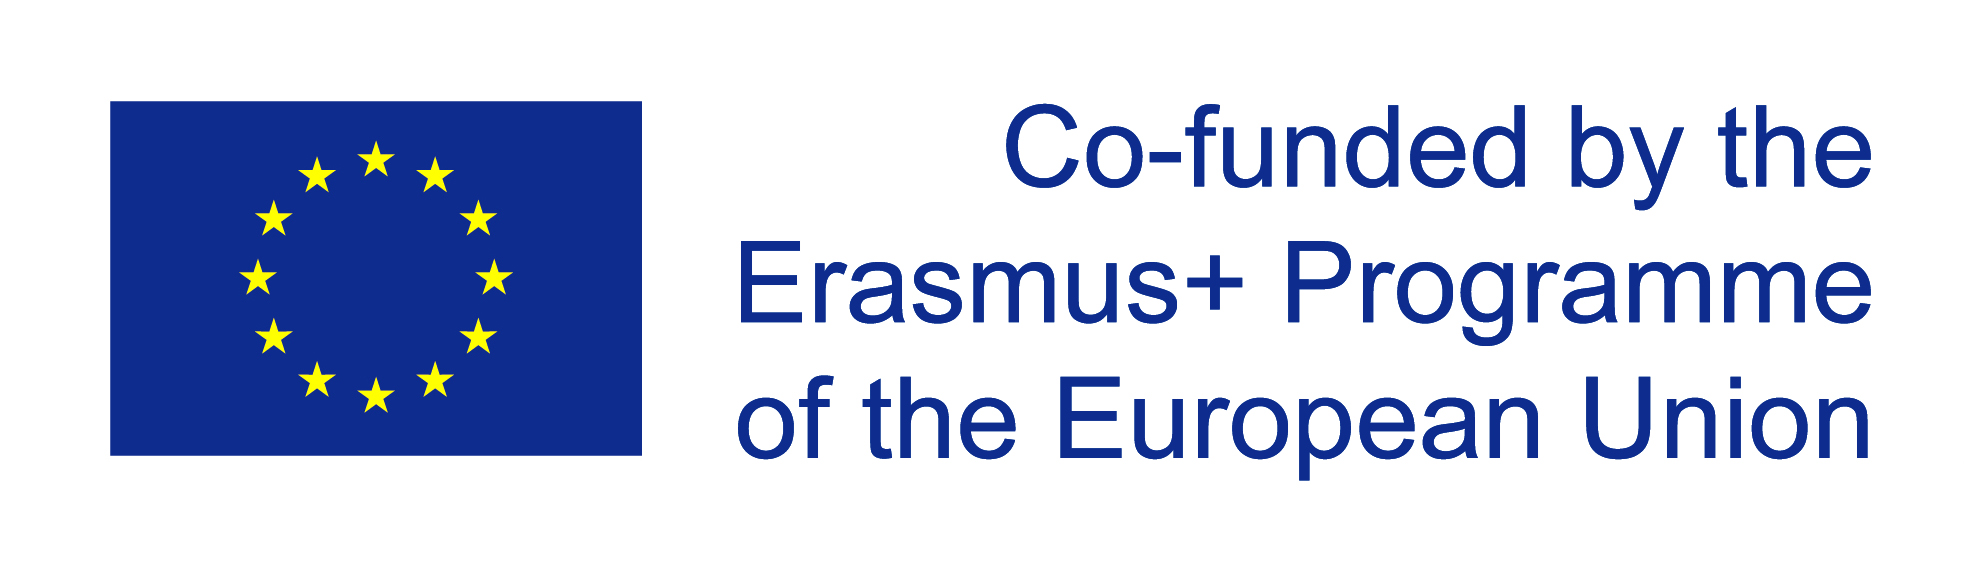 Co-funded by the Erasmus+ Programme of European Union